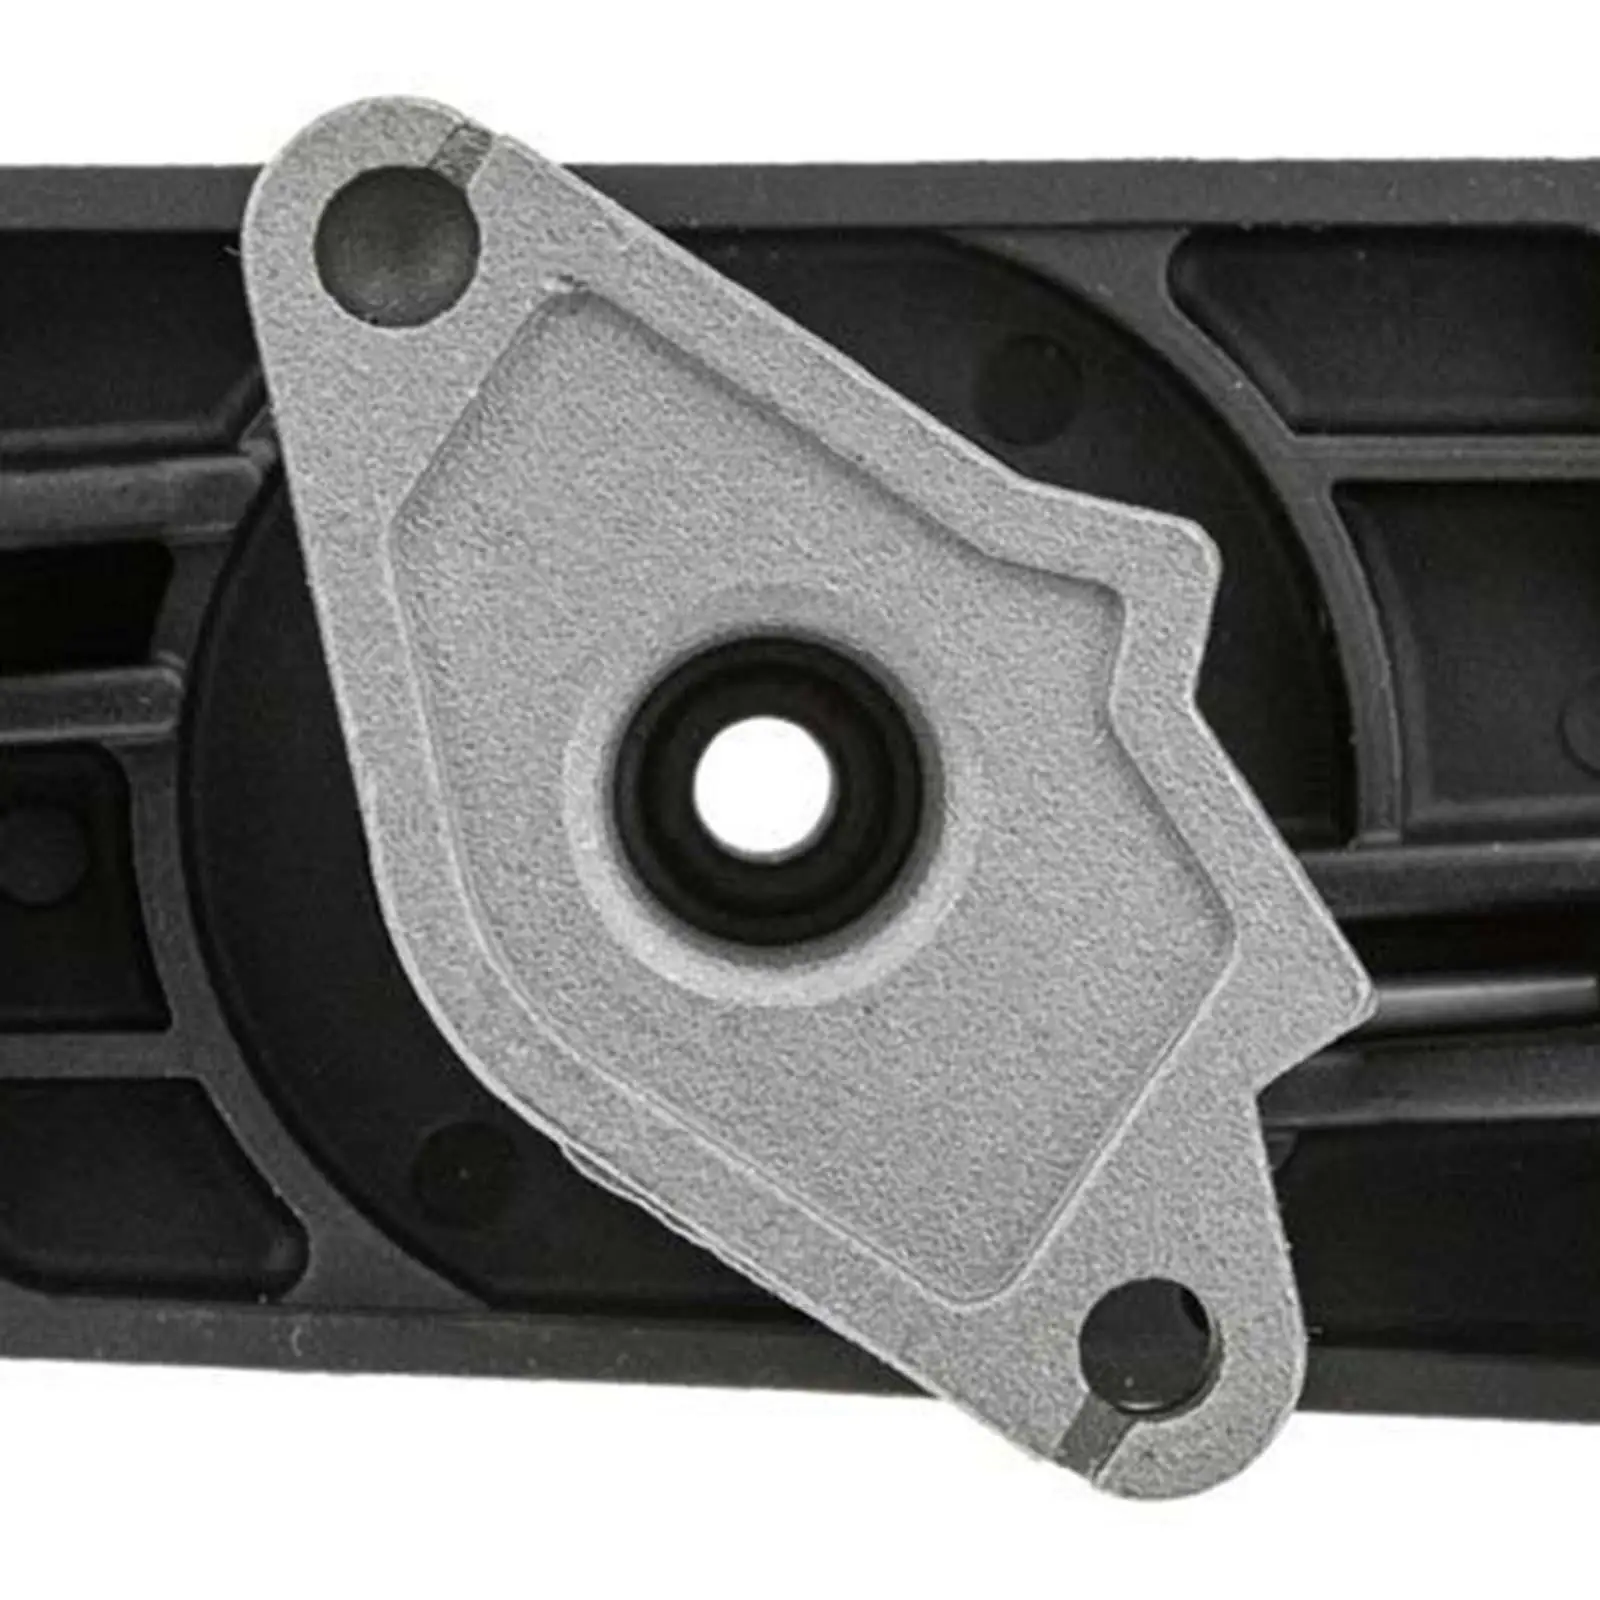 Replacement Rear Door Lock 1356490080 Sturdy Simple Installation Good Performance Professional Vehicle Repair Parts Replaces